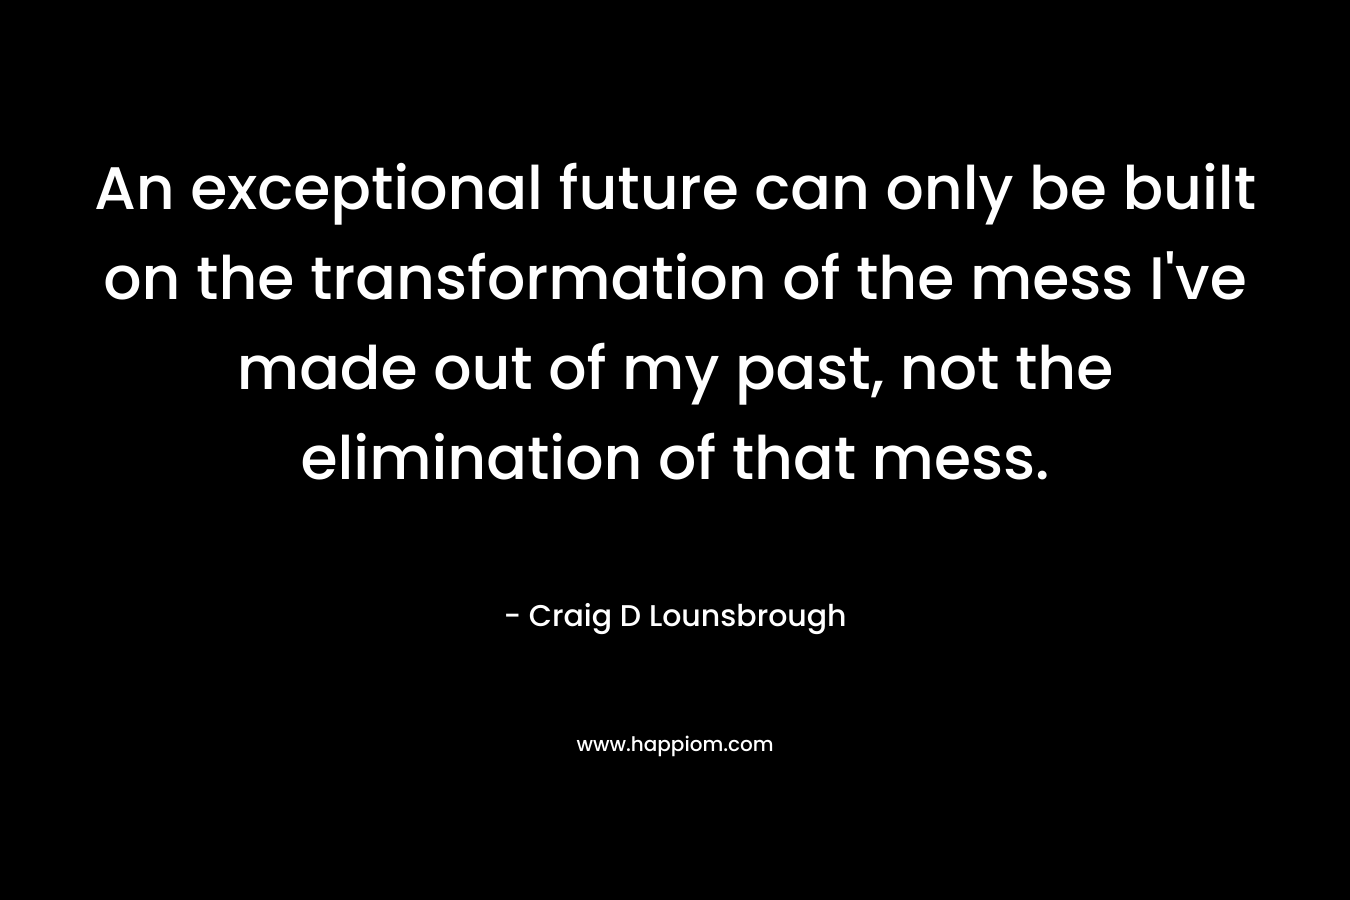 An exceptional future can only be built on the transformation of the mess I've made out of my past, not the elimination of that mess.